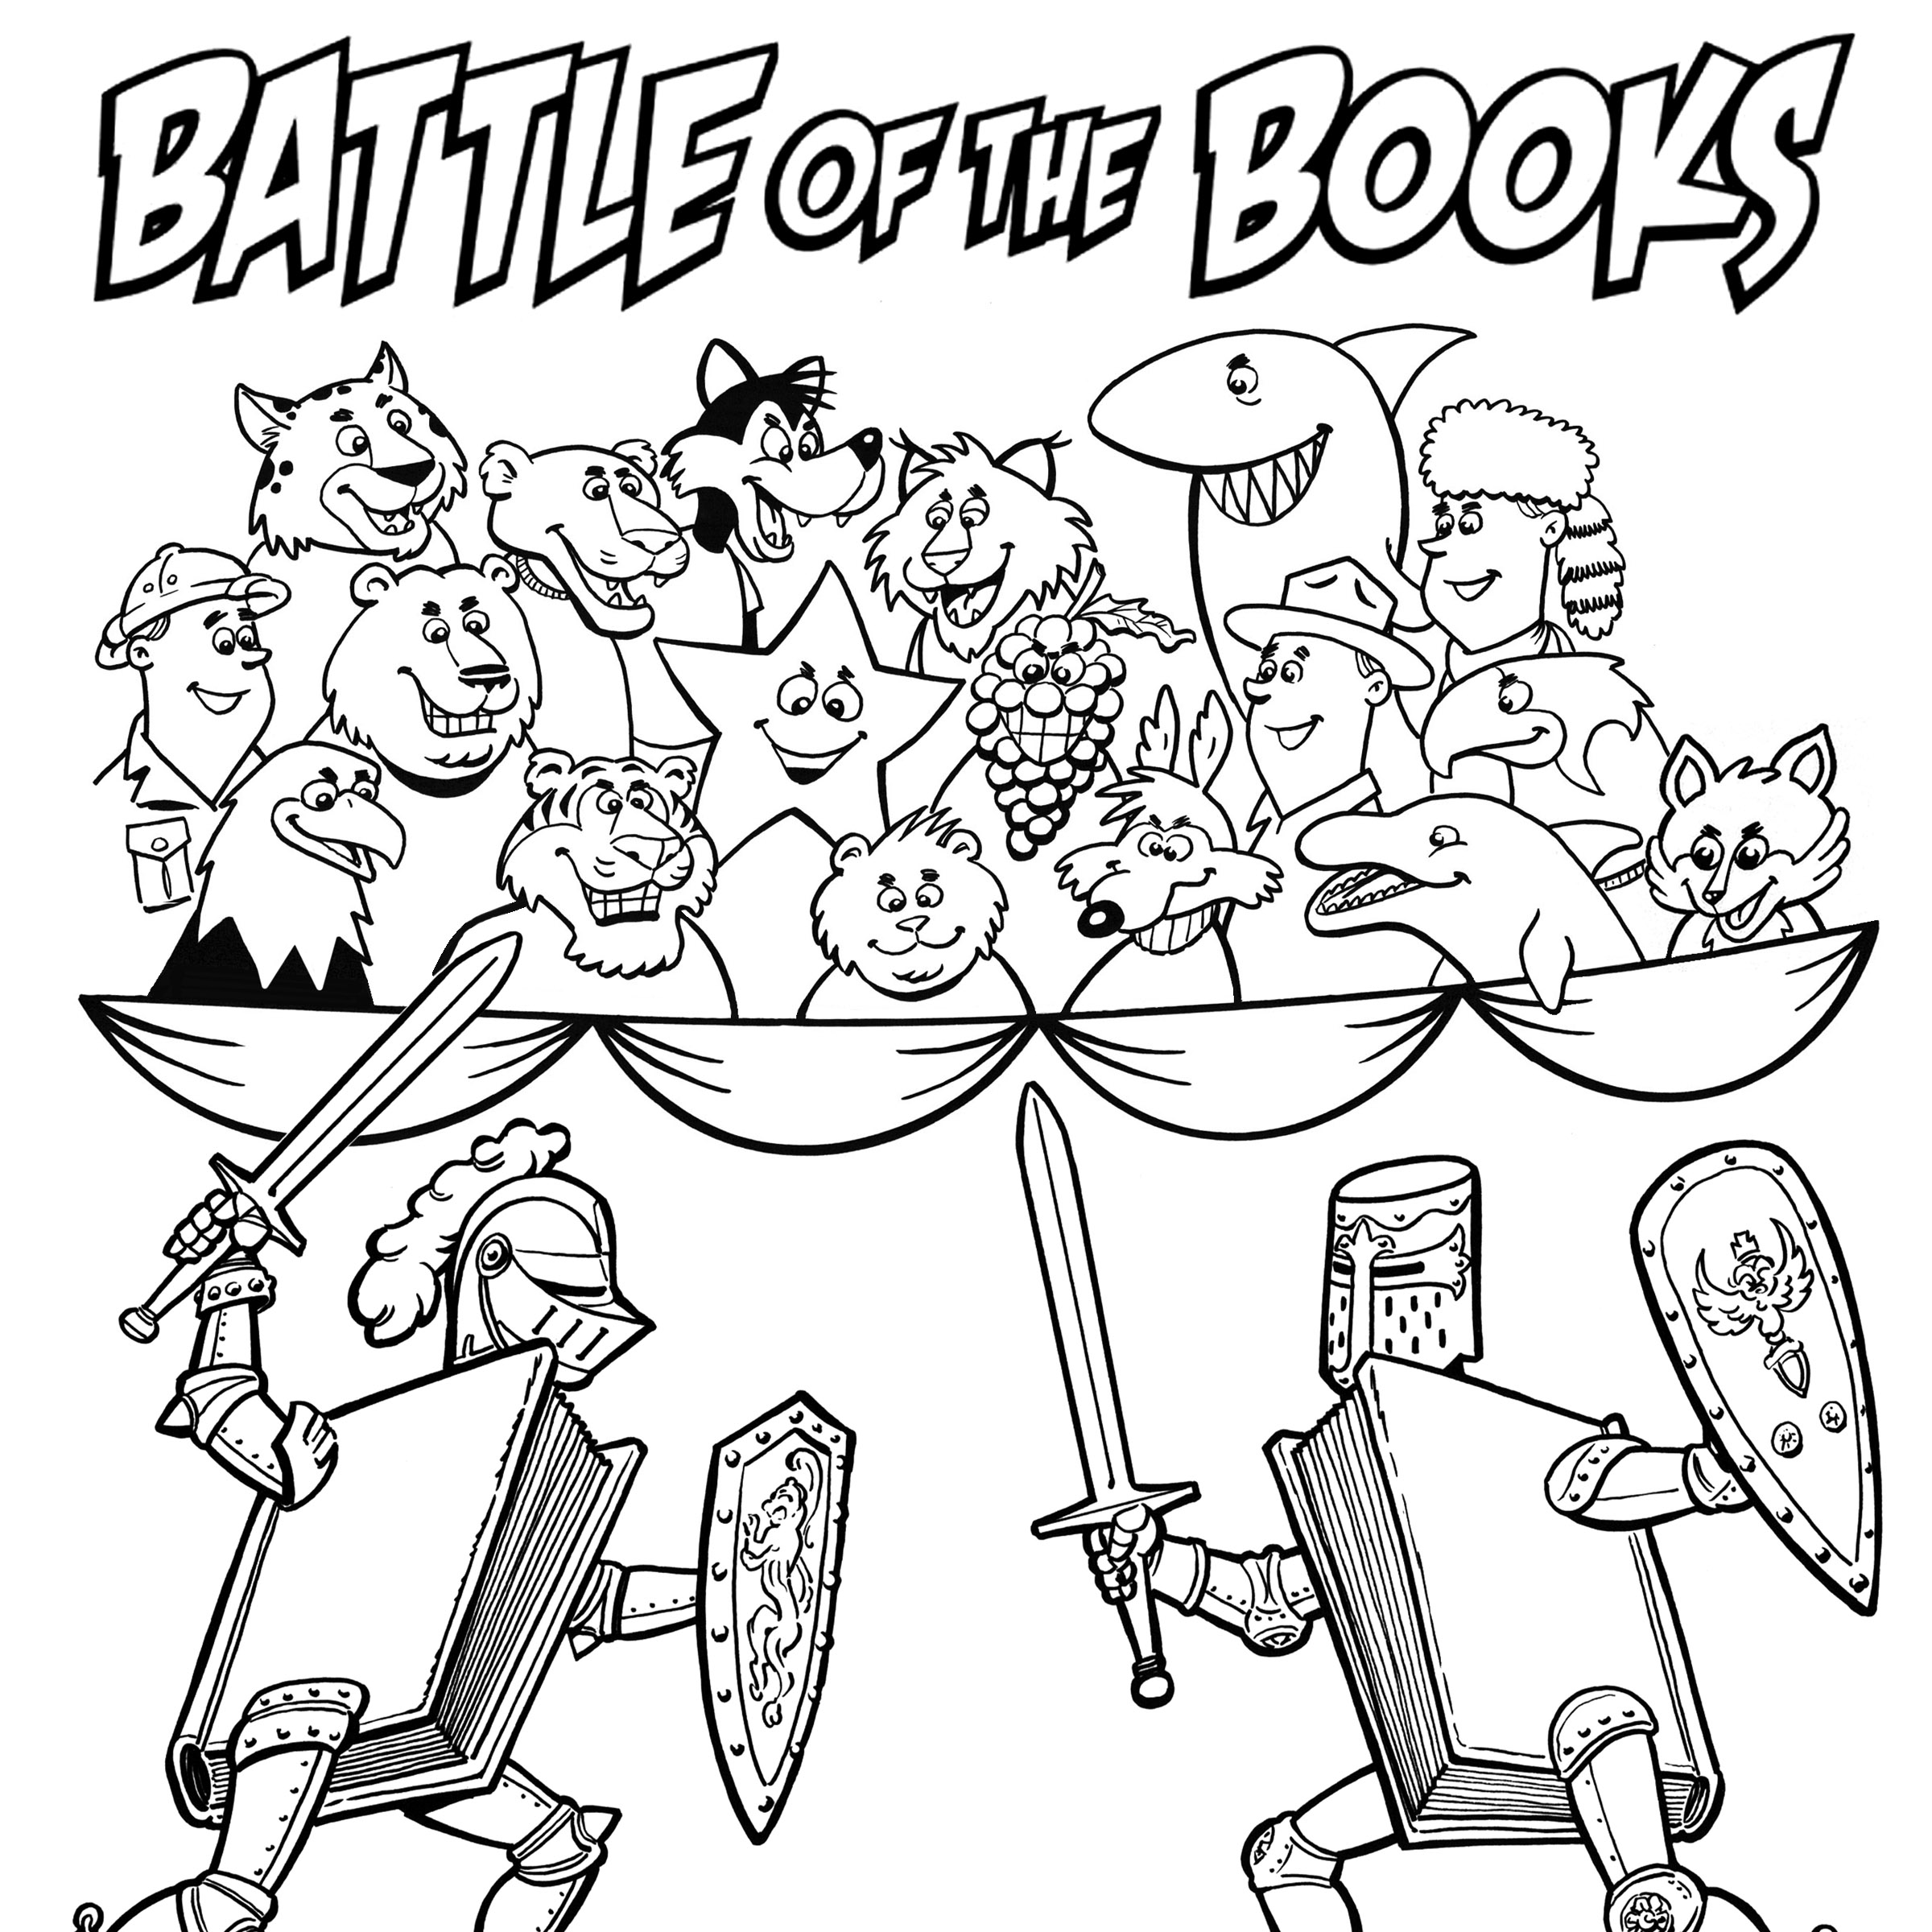 Text: Bate of the Text reads "Battle of the Books" with mascots from Etiwanda Schools observing two knights  with books for bodies and shields and swords battle elow.